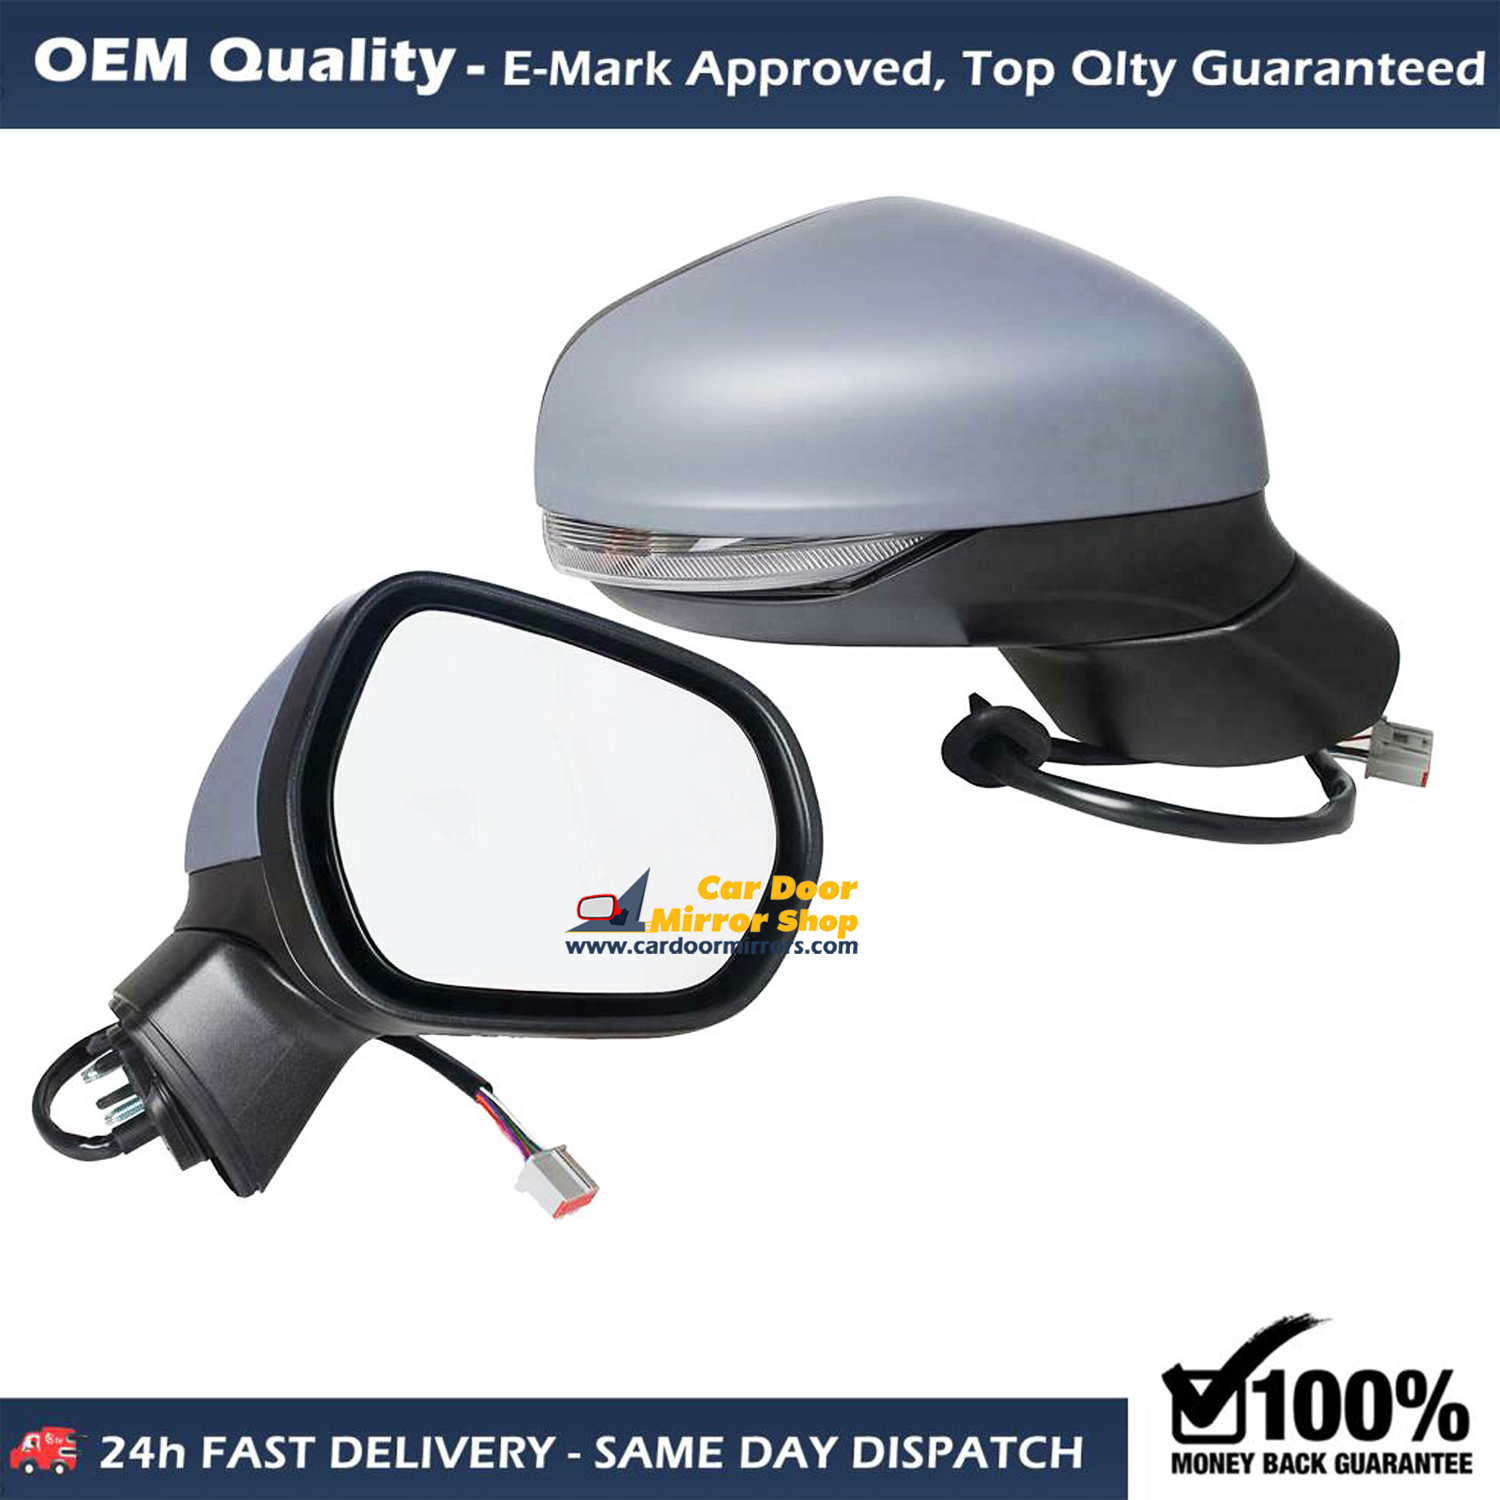 Ford Fiesta Complete Wing Mirror Unit RIGHT HAND ( UK Driver Side ) 2017 to 2020 – Electric Wing Mirror Unit